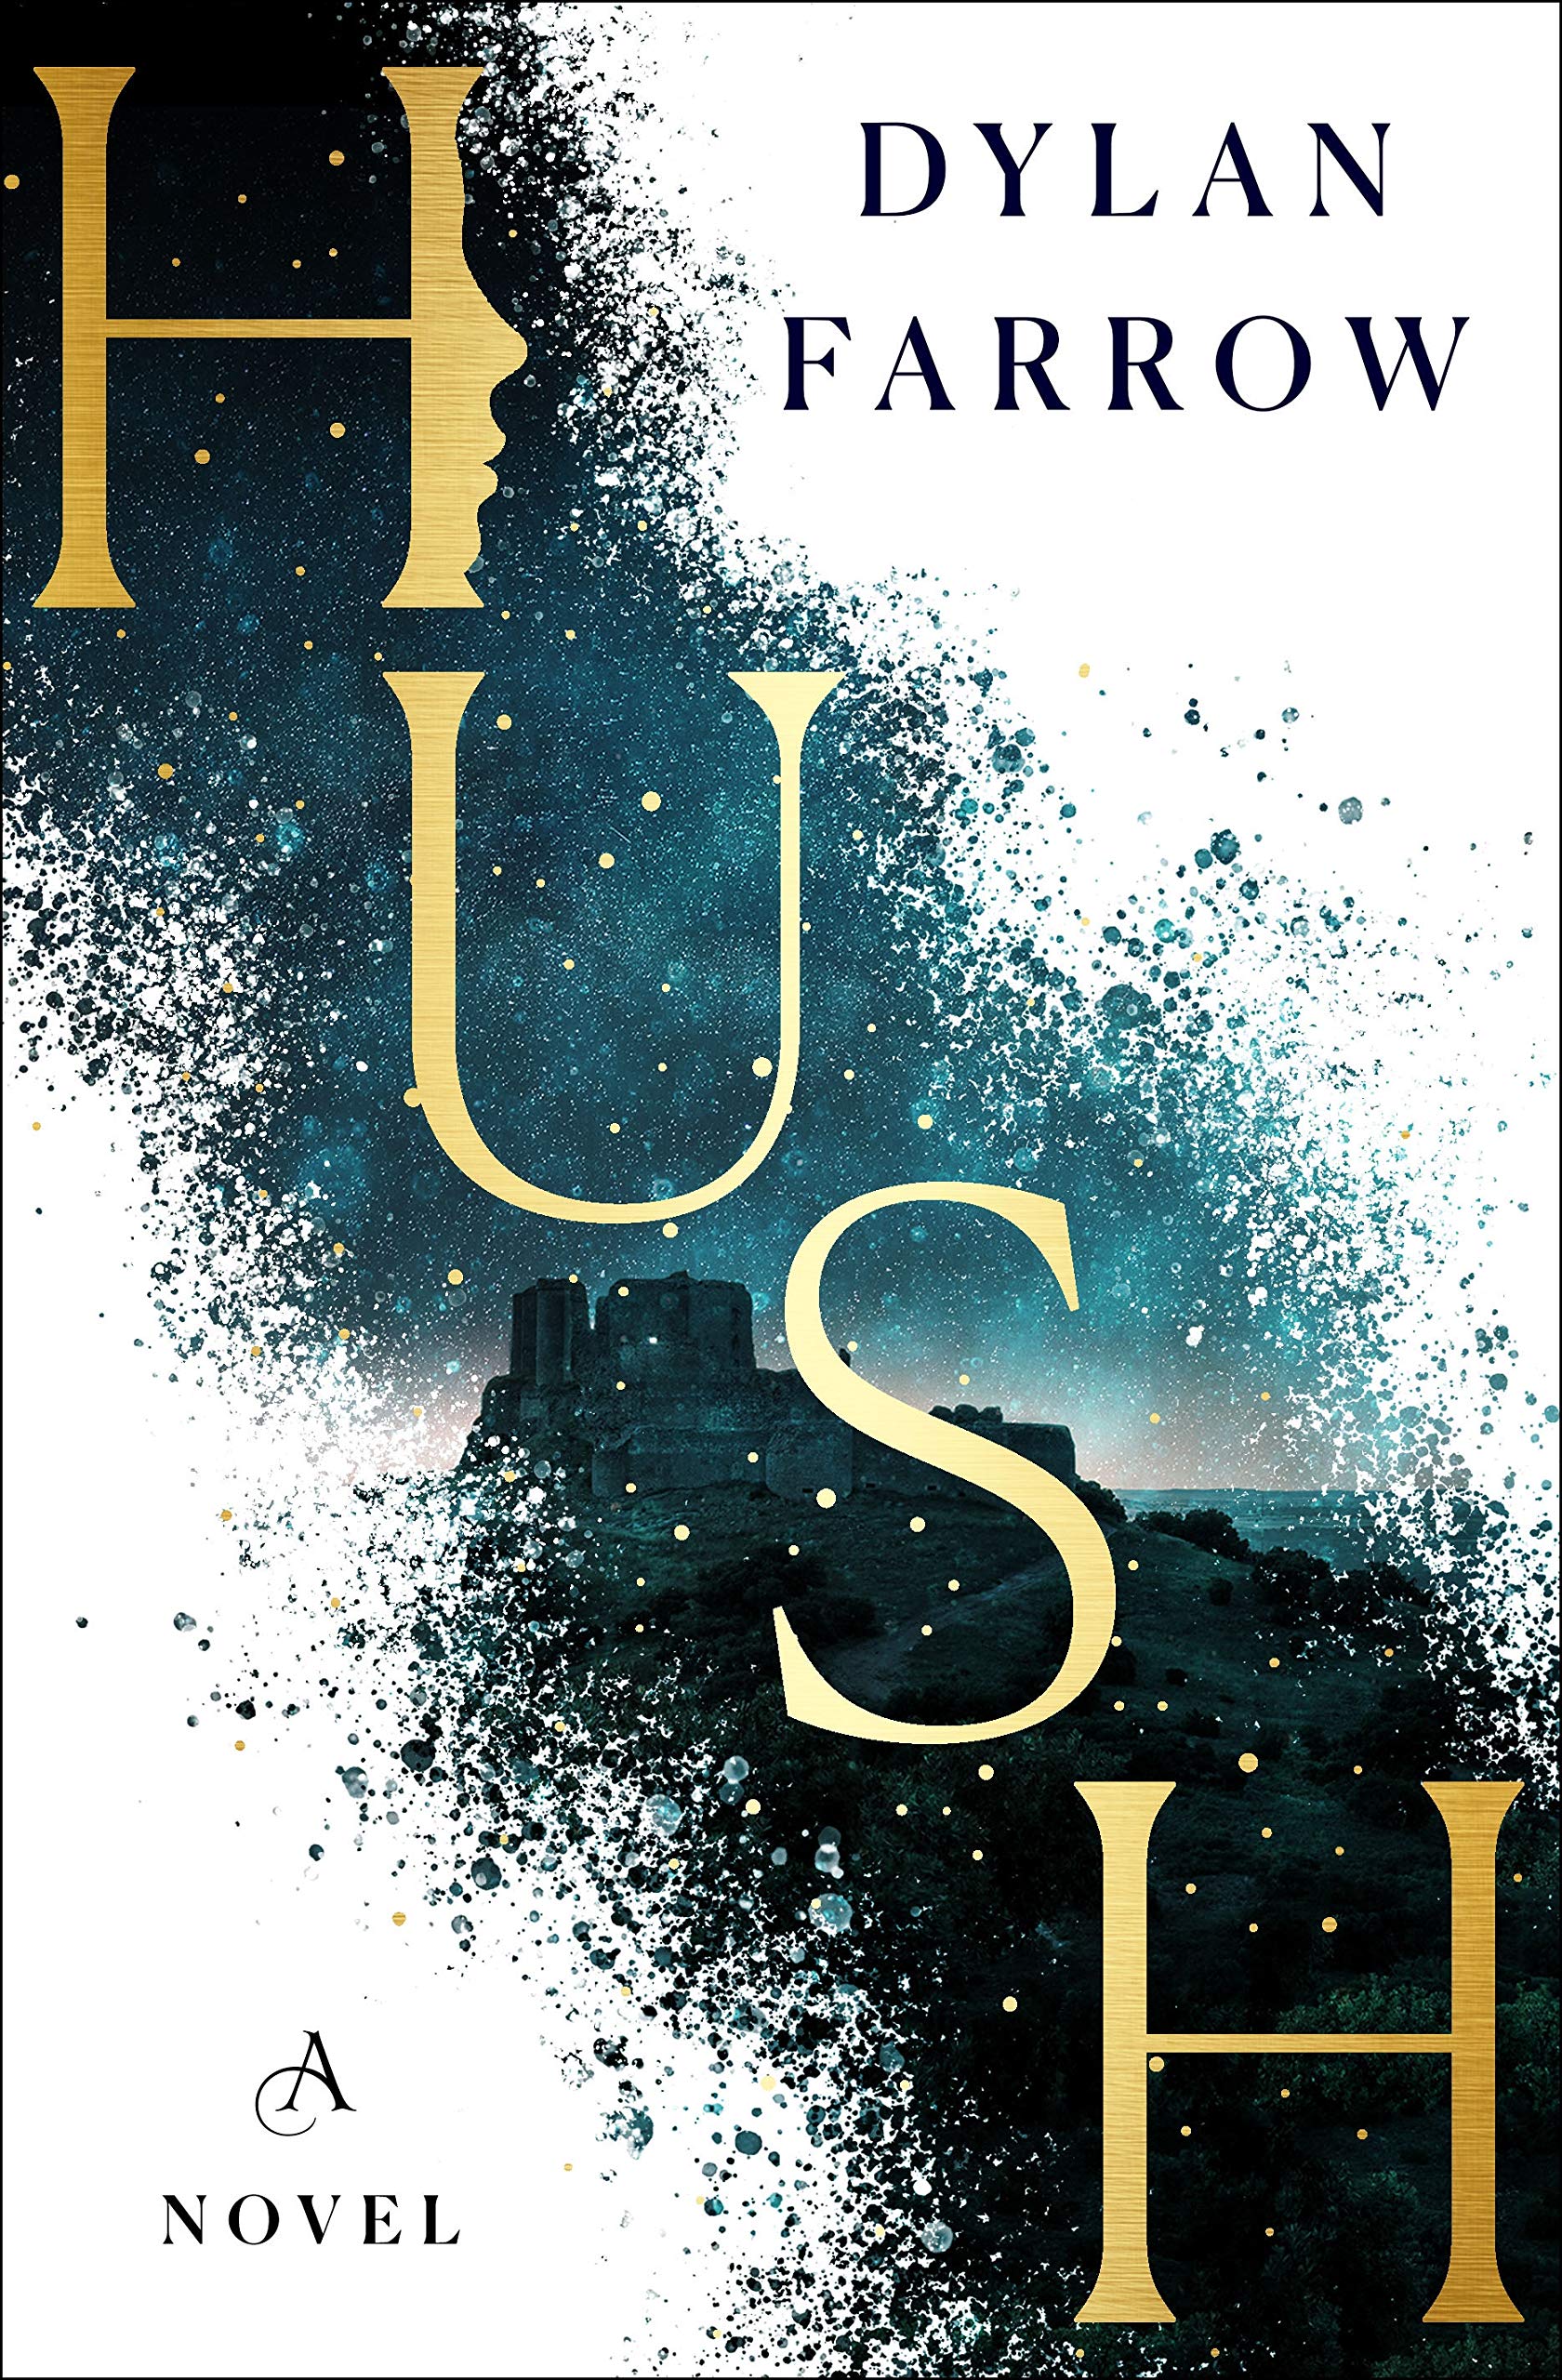 Hush book cover review